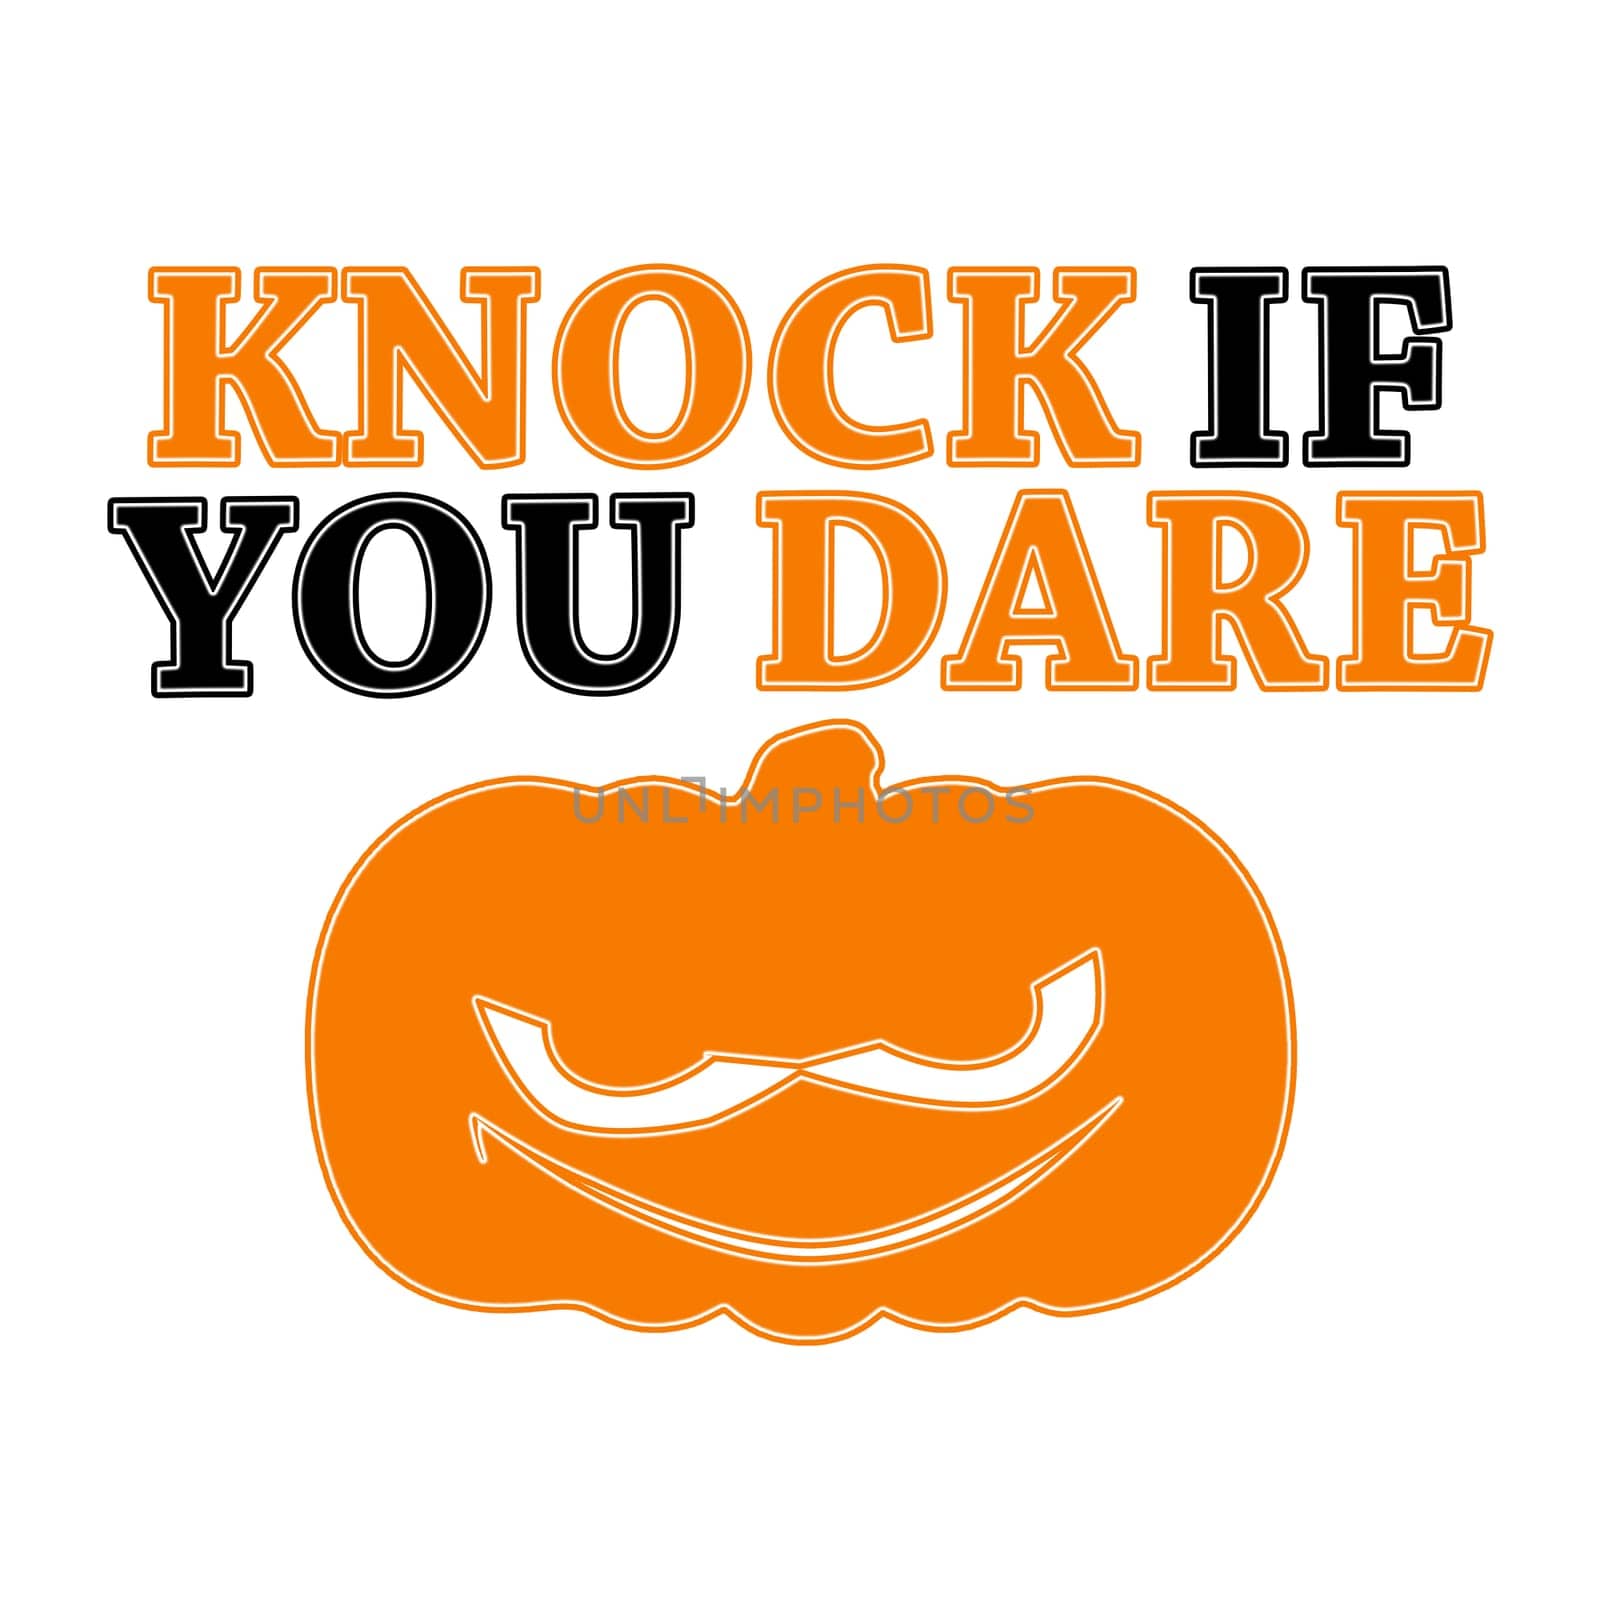 A halloween sign with the text "Knock if you dare".